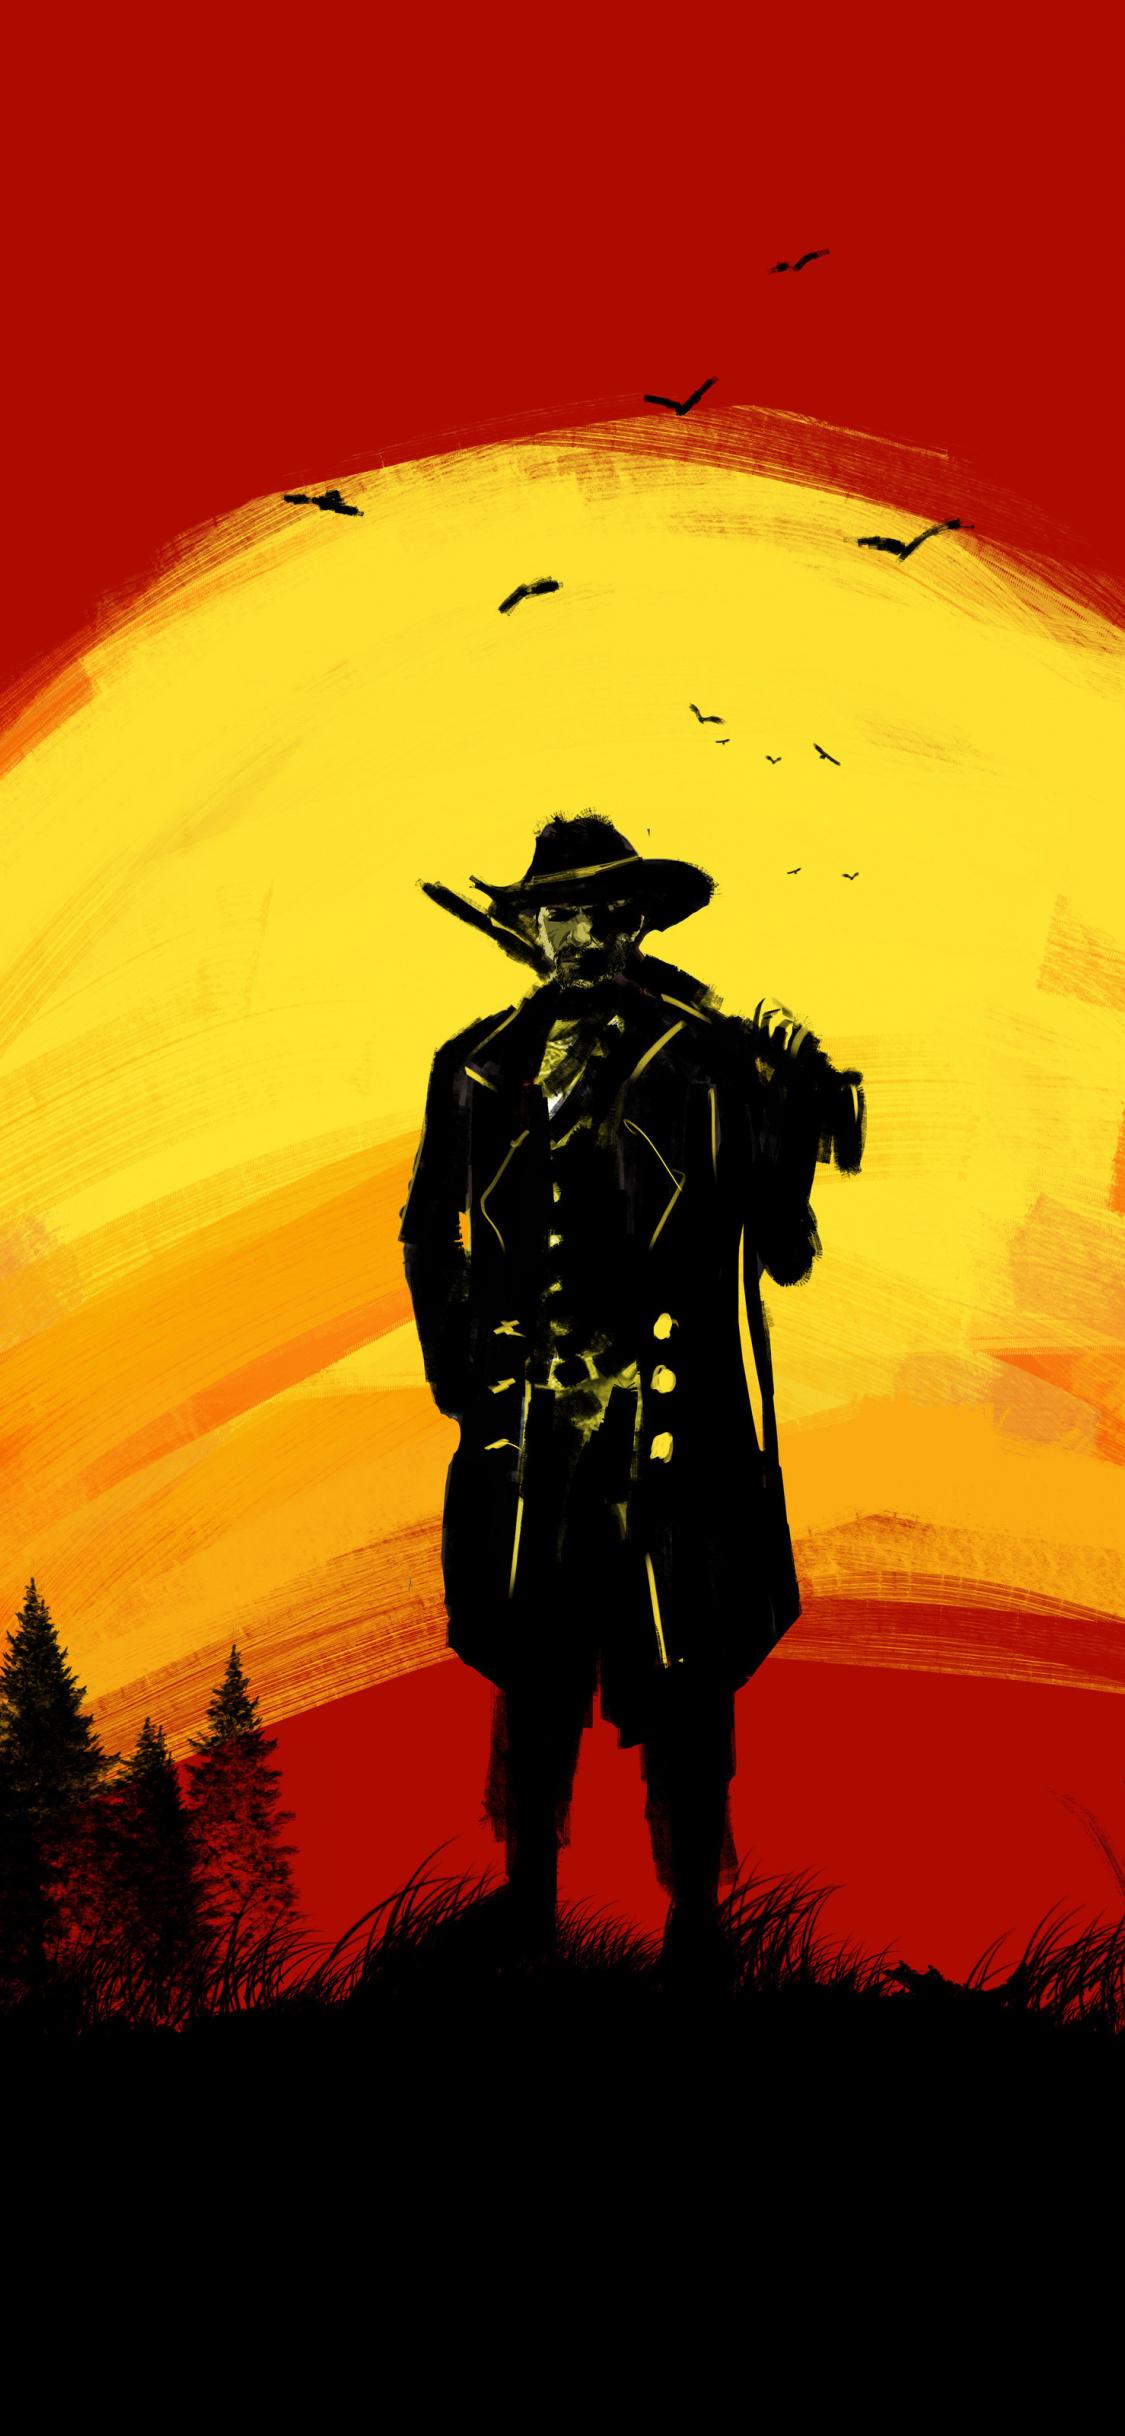 Download 1125x2436 wallpapers red dead redemption 2, cowboy